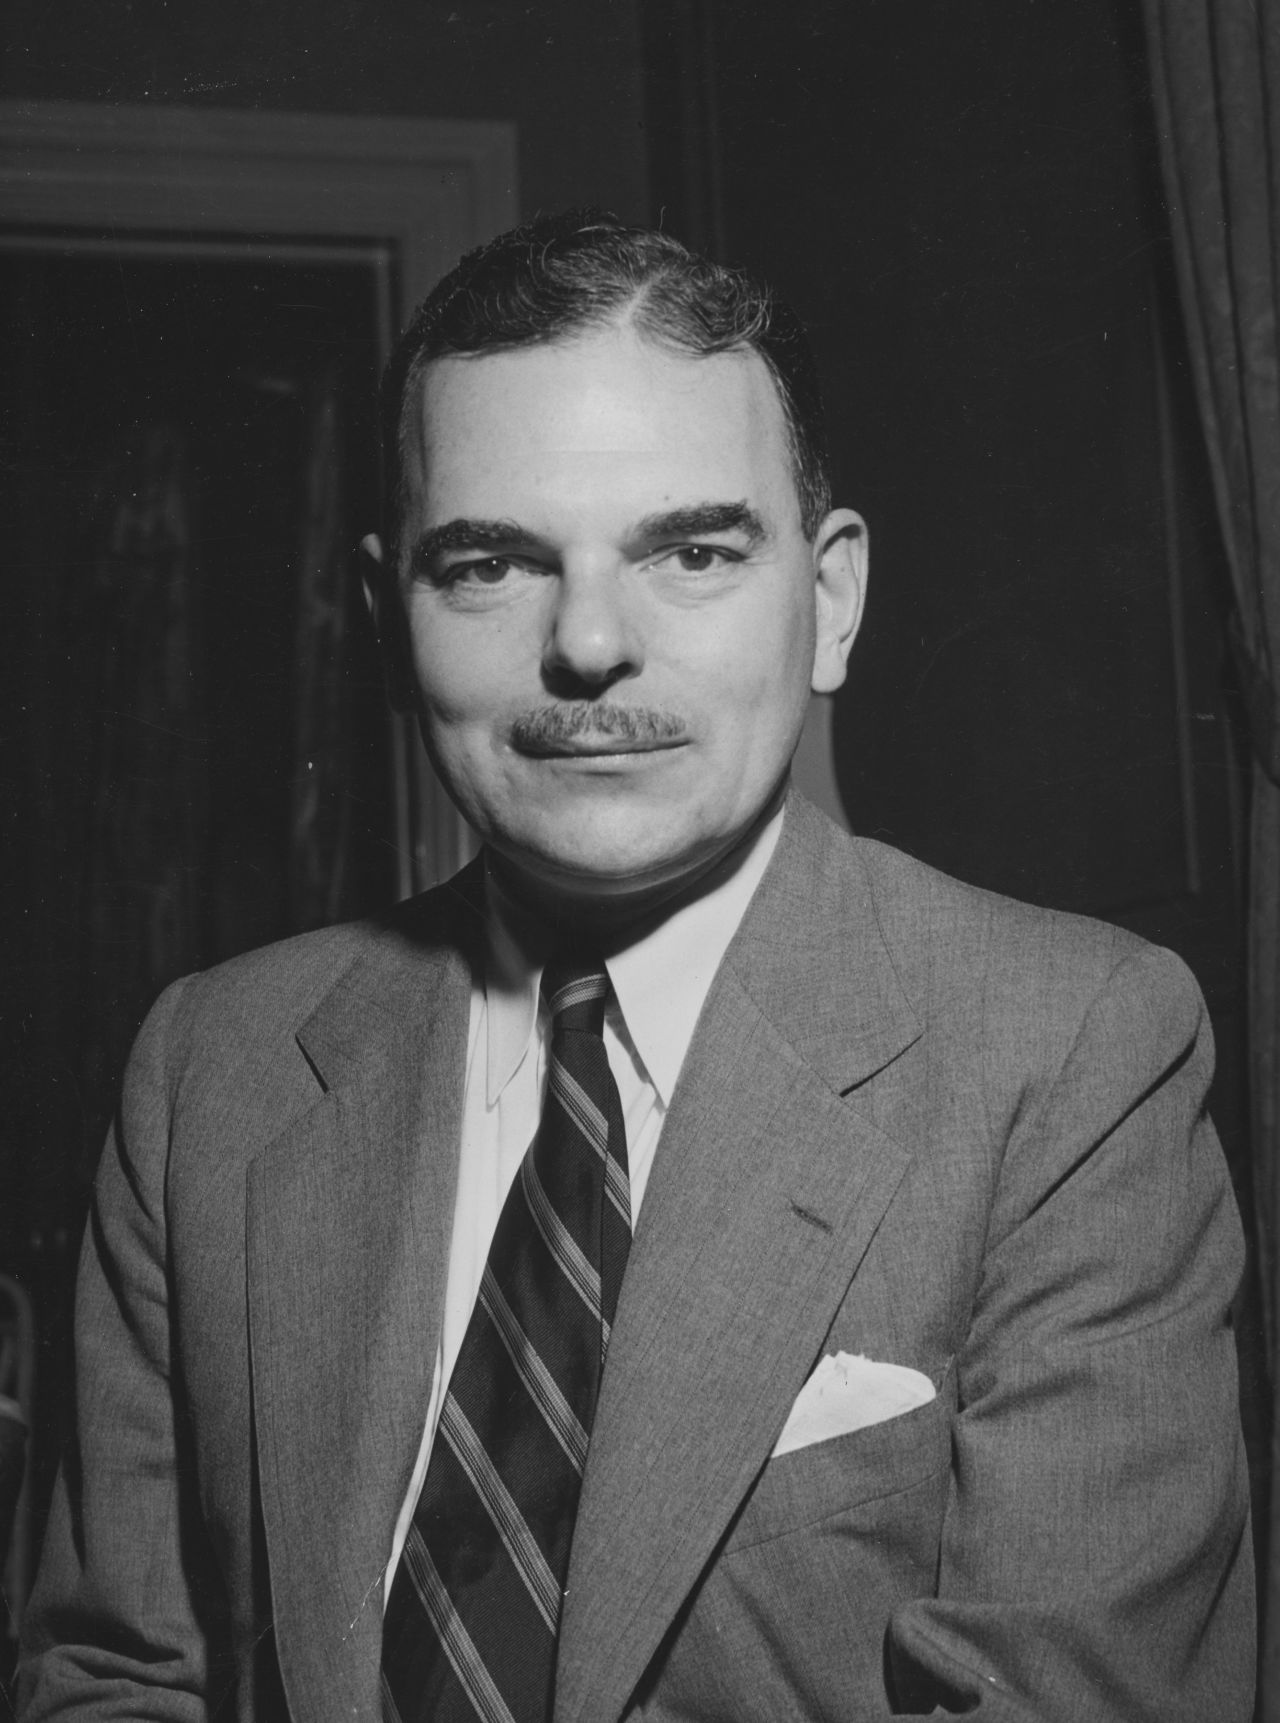 In 1944, Republican nominee Thomas E. Dewey lost his birth state of Michigan and his home state of New York to incumbent President Franklin Roosevelt.